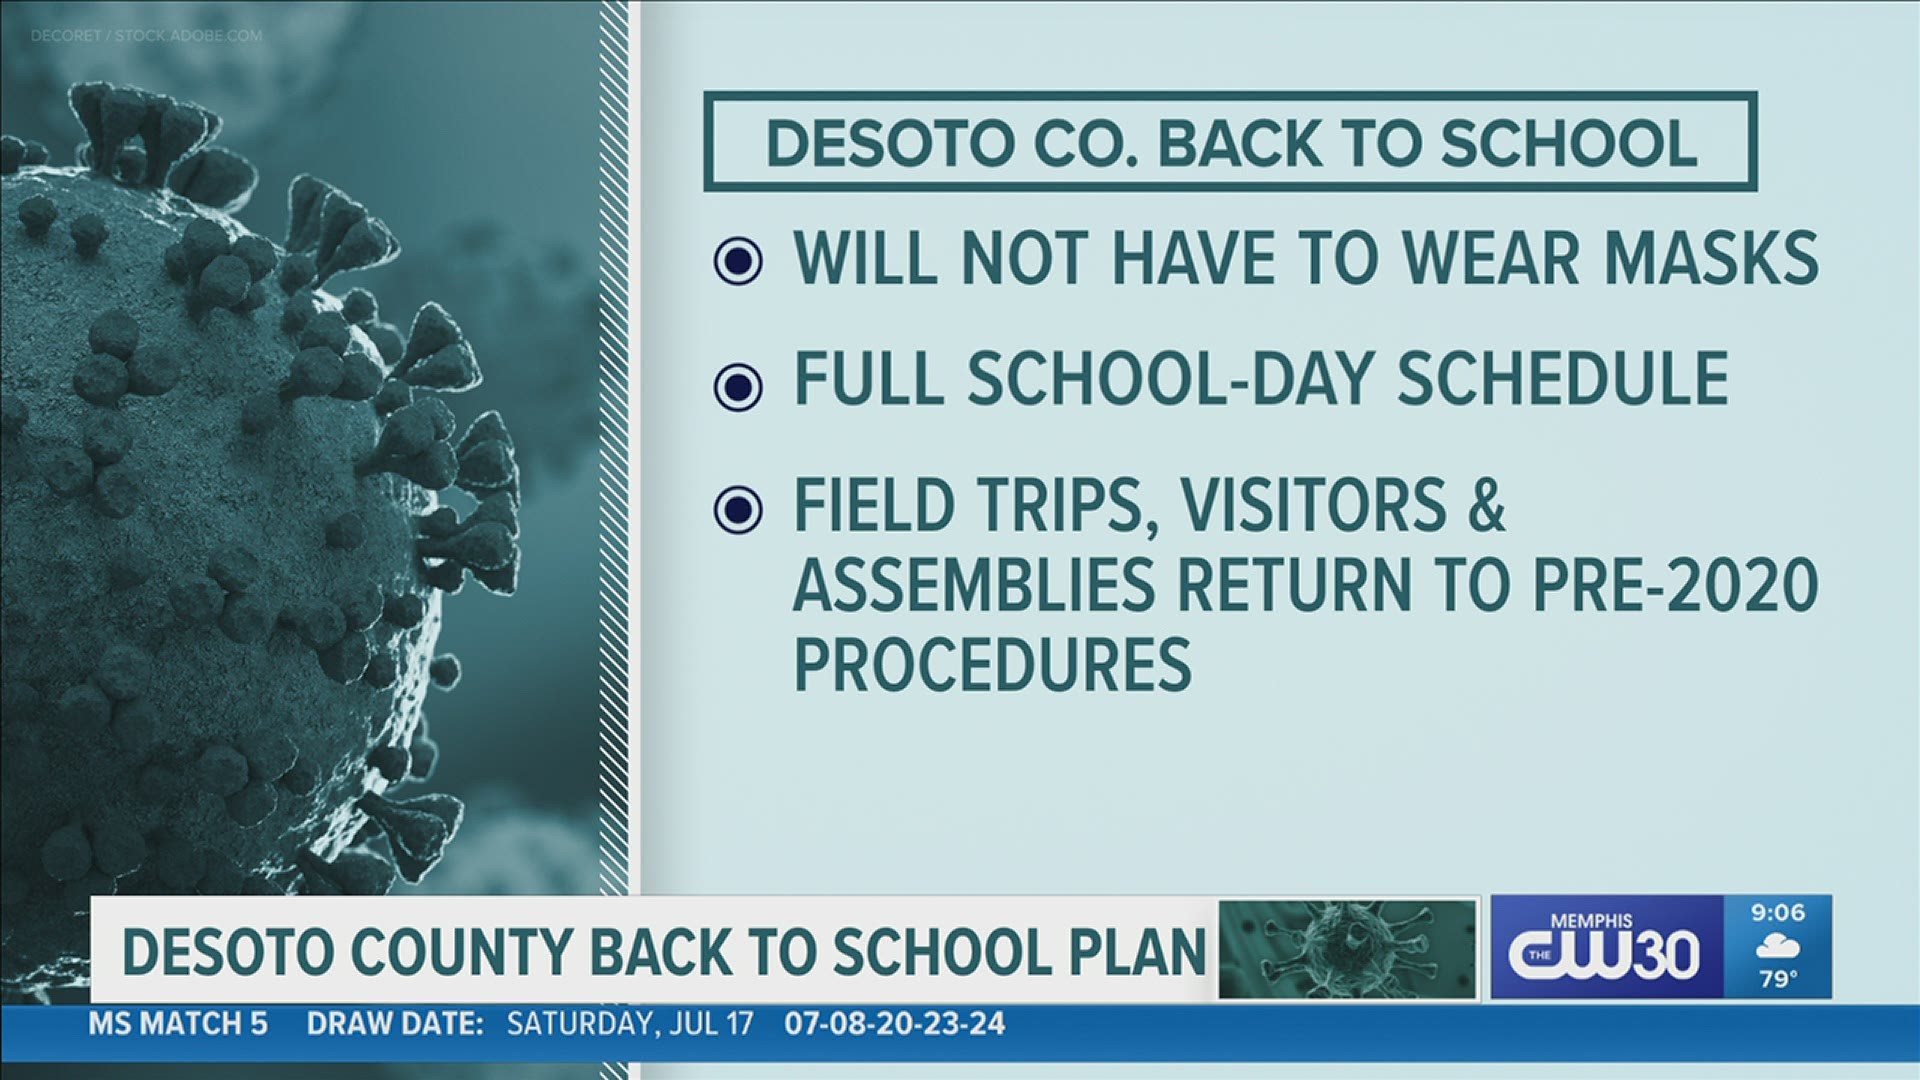 DeSoto County Schools will not require students to wear masks for 2021-2022 school year